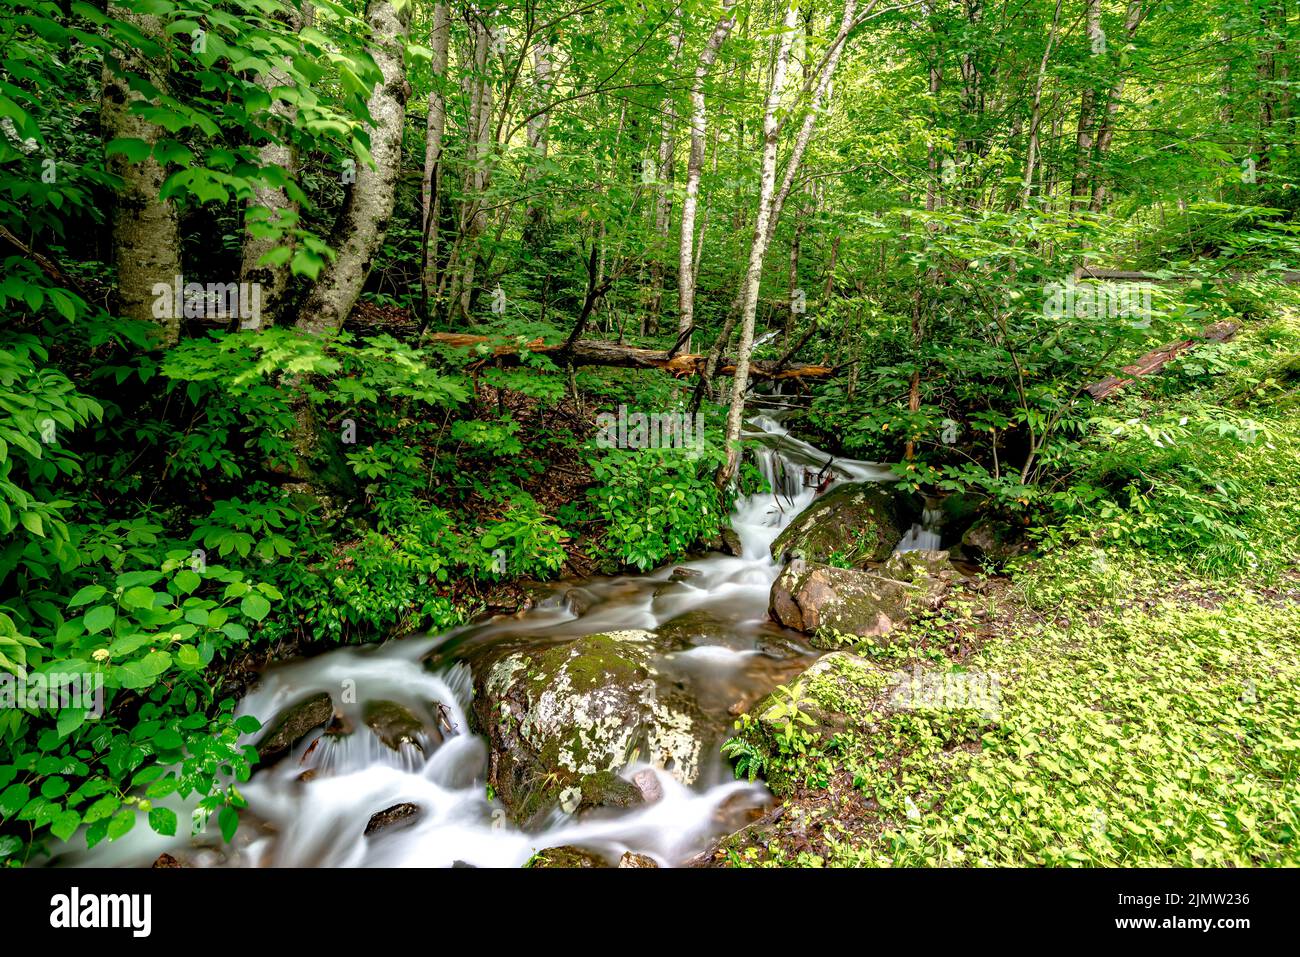 Beautiful peaceful nature on a crek in the mountains Stock Photo